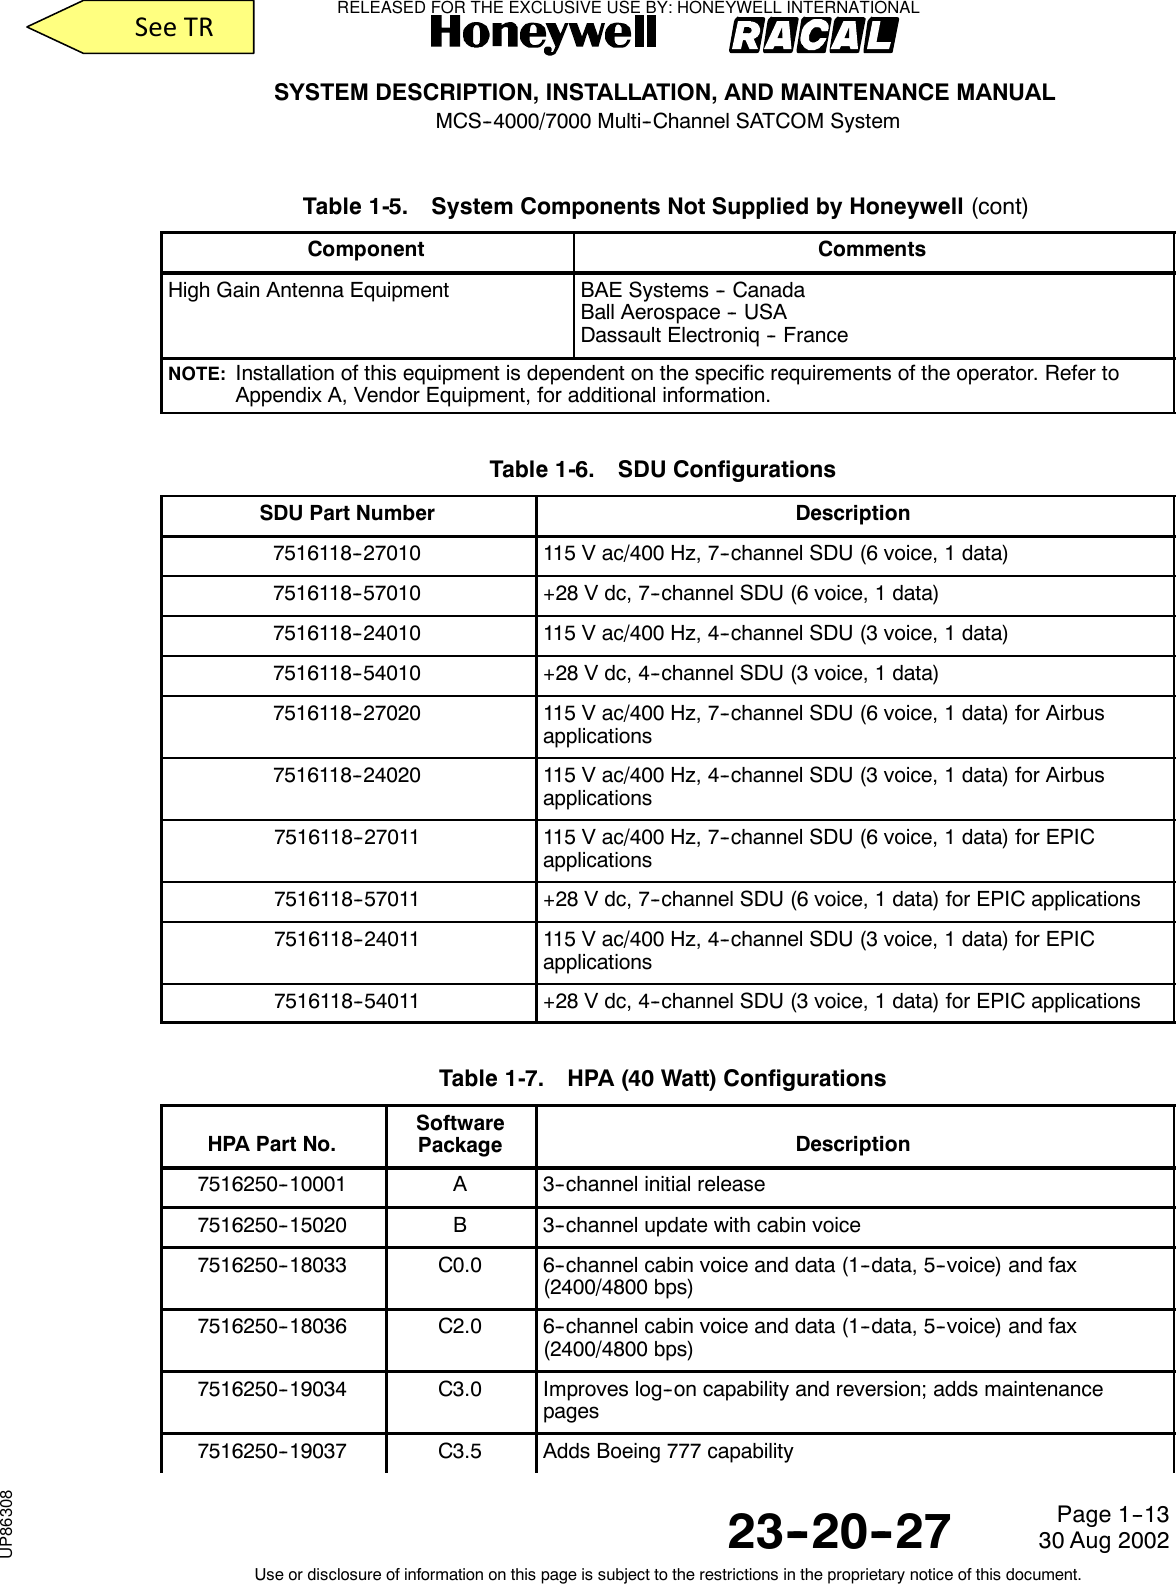 SYSTEM DESCRIPTION, INSTALLATION, AND MAINTENANCE MANUALMCS--4000/7000 Multi--Channel SATCOM System23--20--2730 Aug 2002Use or disclosure of information on this page is subject to the restrictions in the proprietary notice of this document.Page 1--13Table 1-5. System Components Not Supplied by Honeywell (cont)Component CommentsHigh Gain Antenna Equipment BAE Systems -- CanadaBall Aerospace -- USADassault Electroniq -- FranceNOTE: Installation of this equipment is dependent on the specific requirements of the operator. Refer toAppendix A, Vendor Equipment, for additional information.Table 1-6. SDU ConfigurationsSDU Part Number Description7516118--27010 115 V ac/400 Hz, 7--channel SDU (6 voice, 1 data)7516118--57010 +28 V dc, 7--channel SDU (6 voice, 1 data)7516118--24010 115 V ac/400 Hz, 4--channel SDU (3 voice, 1 data)7516118--54010 +28 V dc, 4--channel SDU (3 voice, 1 data)7516118--27020 115 V ac/400 Hz, 7--channel SDU (6 voice, 1 data) for Airbusapplications7516118--24020 115 V ac/400 Hz, 4--channel SDU (3 voice, 1 data) for Airbusapplications7516118--27011 115 V ac/400 Hz, 7--channel SDU (6 voice, 1 data) for EPICapplications7516118--57011 +28 V dc, 7--channel SDU (6 voice, 1 data) for EPIC applications7516118--24011 115 V ac/400 Hz, 4--channel SDU (3 voice, 1 data) for EPICapplications7516118--54011 +28 V dc, 4--channel SDU (3 voice, 1 data) for EPIC applicationsTable 1-7. HPA (40 Watt) ConfigurationsHPA Part No.SoftwarePackage Description7516250--10001 A3--channel initial release7516250--15020 B3--channel update with cabin voice7516250--18033 C0.0 6--channel cabin voice and data (1--data, 5--voice) and fax(2400/4800 bps)7516250--18036 C2.0 6--channel cabin voice and data (1--data, 5--voice) and fax(2400/4800 bps)7516250--19034 C3.0 Improves log--on capability and reversion; adds maintenancepages7516250--19037 C3.5 Adds Boeing 777 capabilityRELEASED FOR THE EXCLUSIVE USE BY: HONEYWELL INTERNATIONALUP86308SeeTR